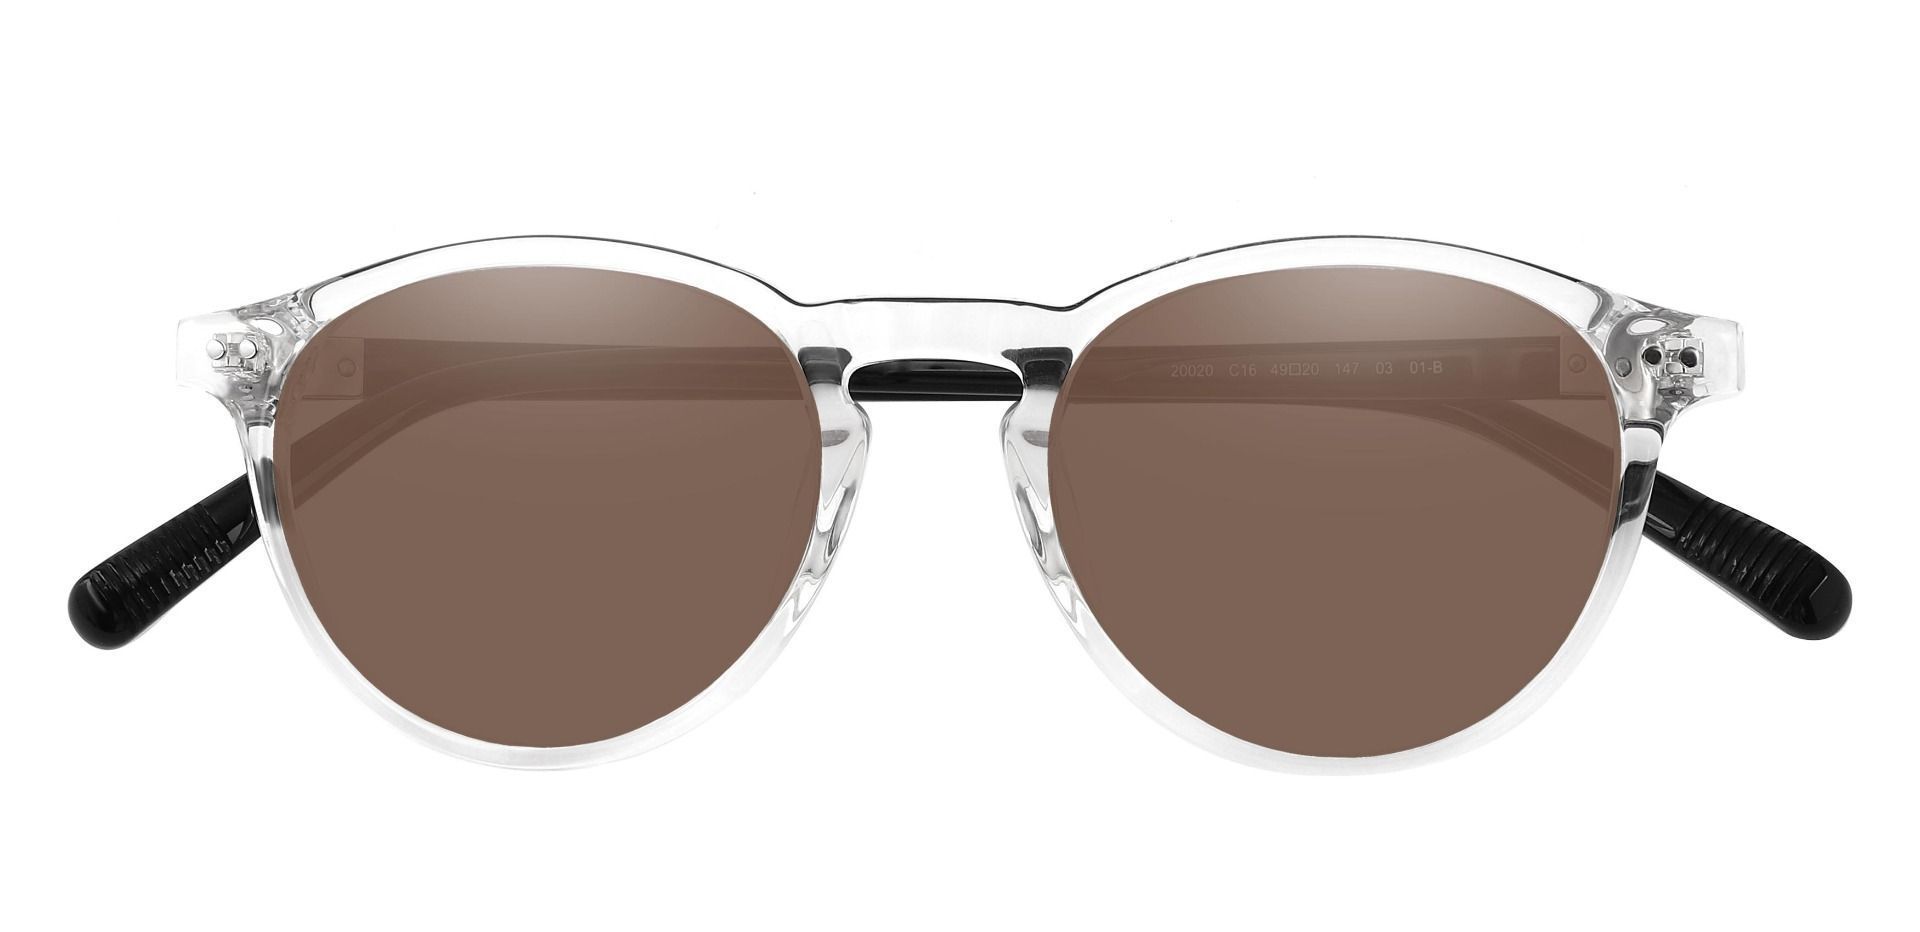 Monarch Oval Non-Rx Sunglasses - Clear Frame With Brown Lenses